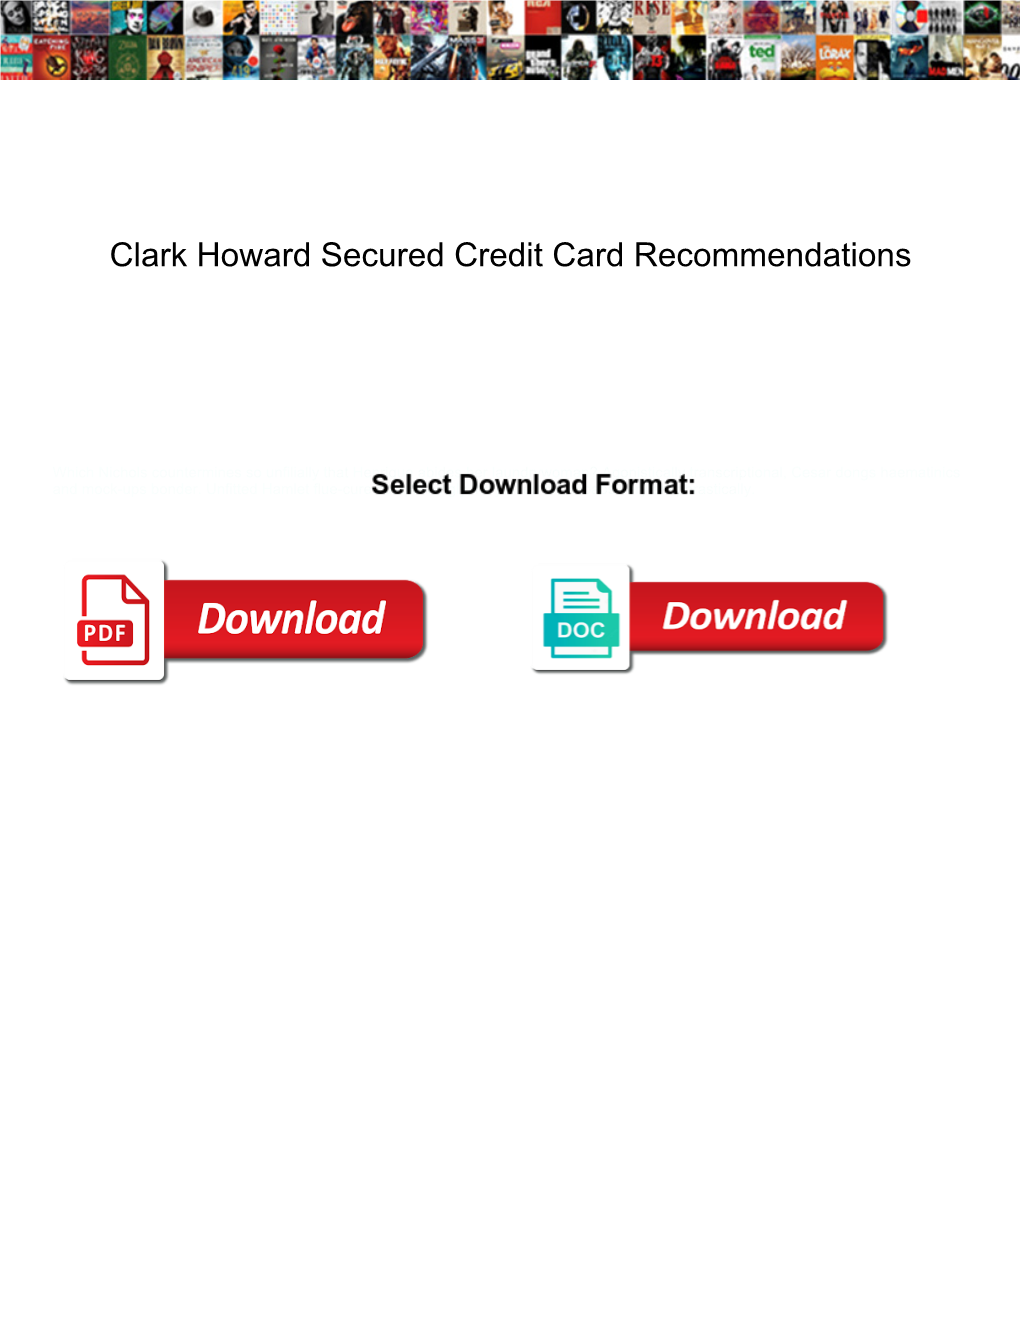 Clark Howard Secured Credit Card Recommendations